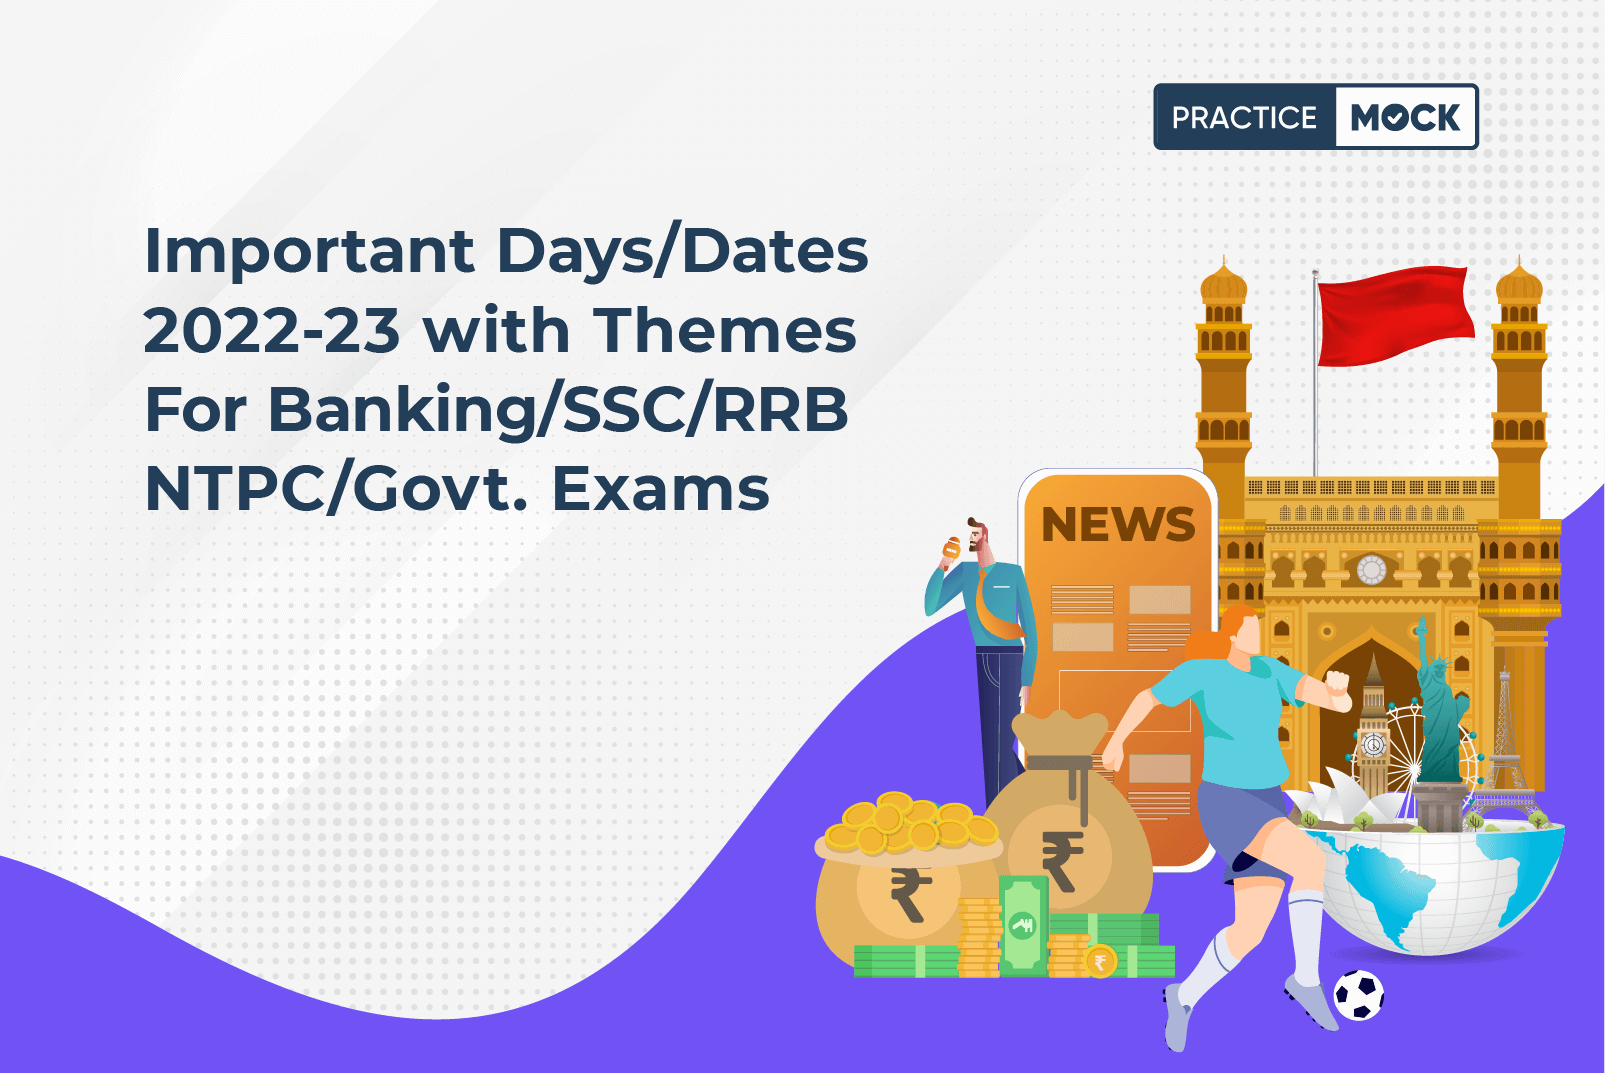 Important DaysDates 2022-23 with Themes for Banking SSC RRB NTPC Govt. Exams (2)